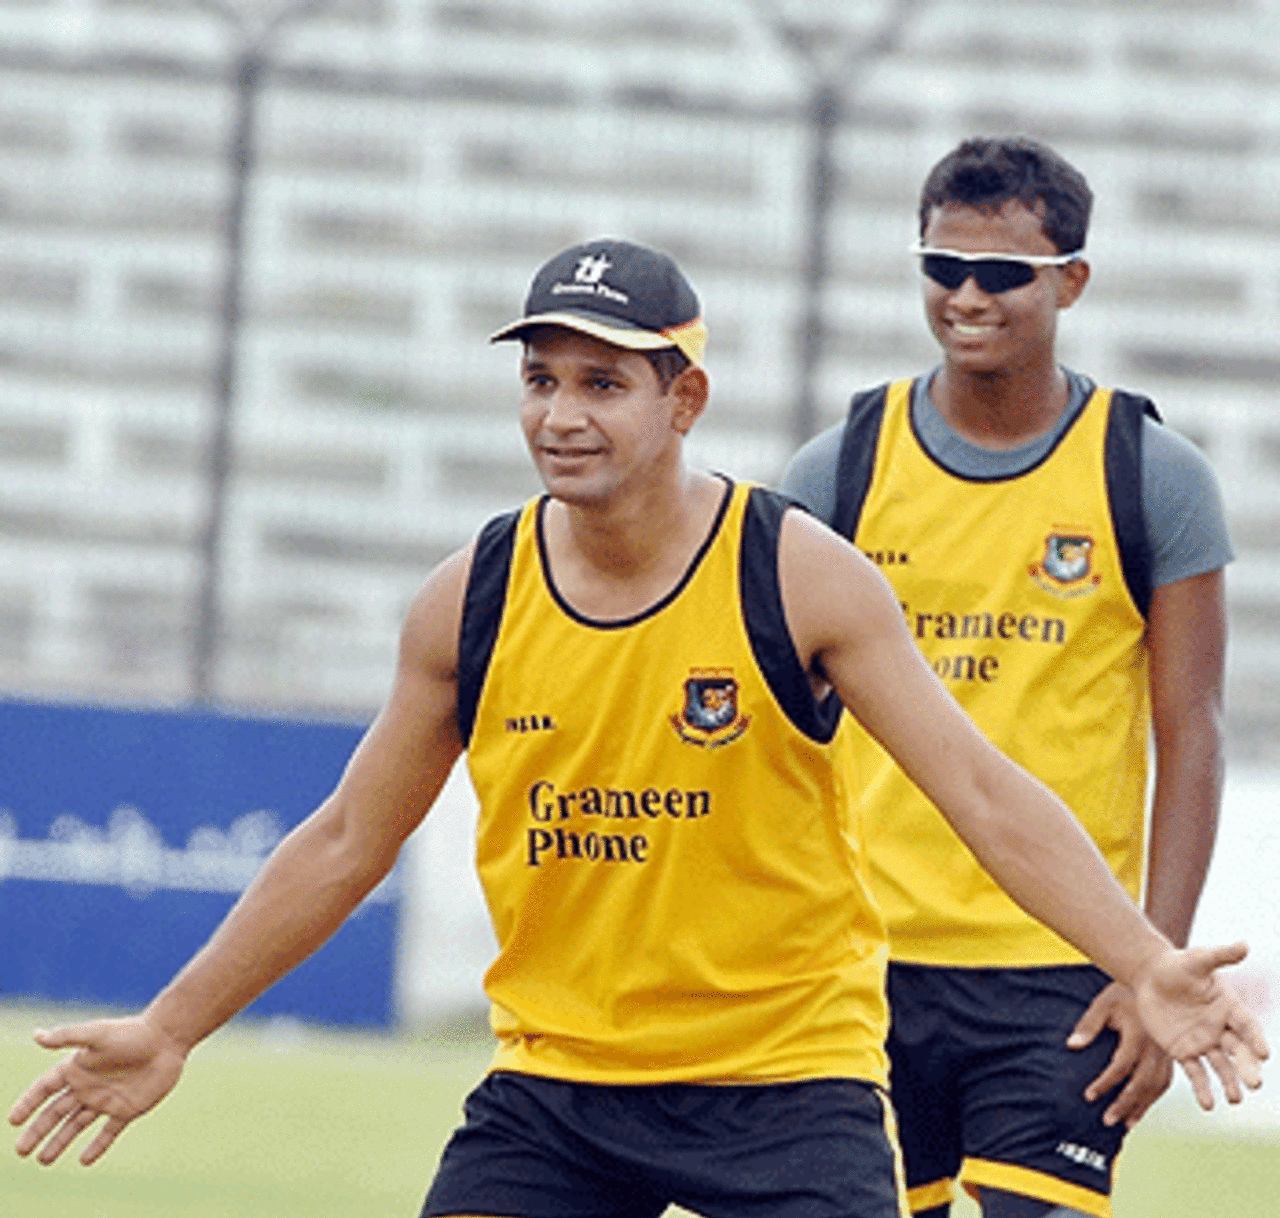 Habibul Bashar engages in a fielding drill as Enamul Haque looks on, Dhaka, April 8, 2006